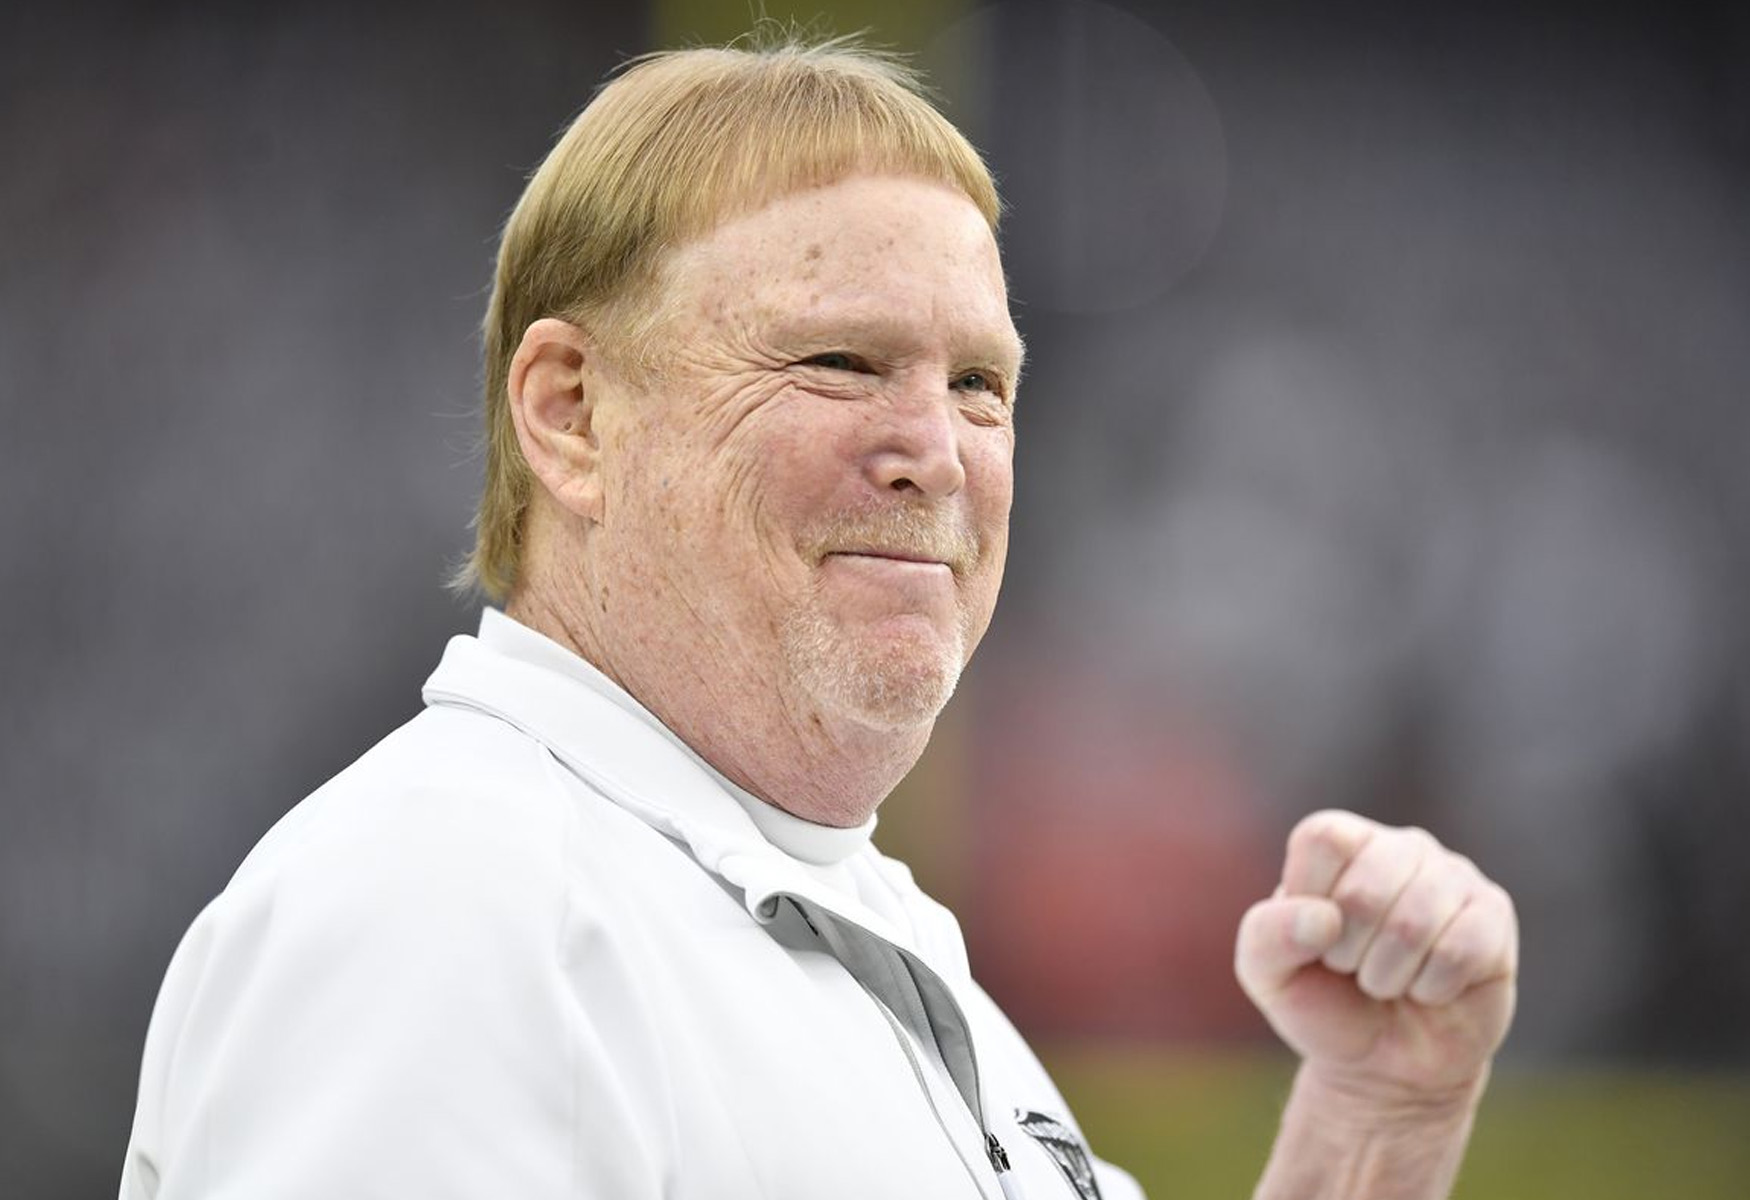 Mark Davis’ Epic Hydration Habits Steal The Show During Raiders’ Dominant Victory